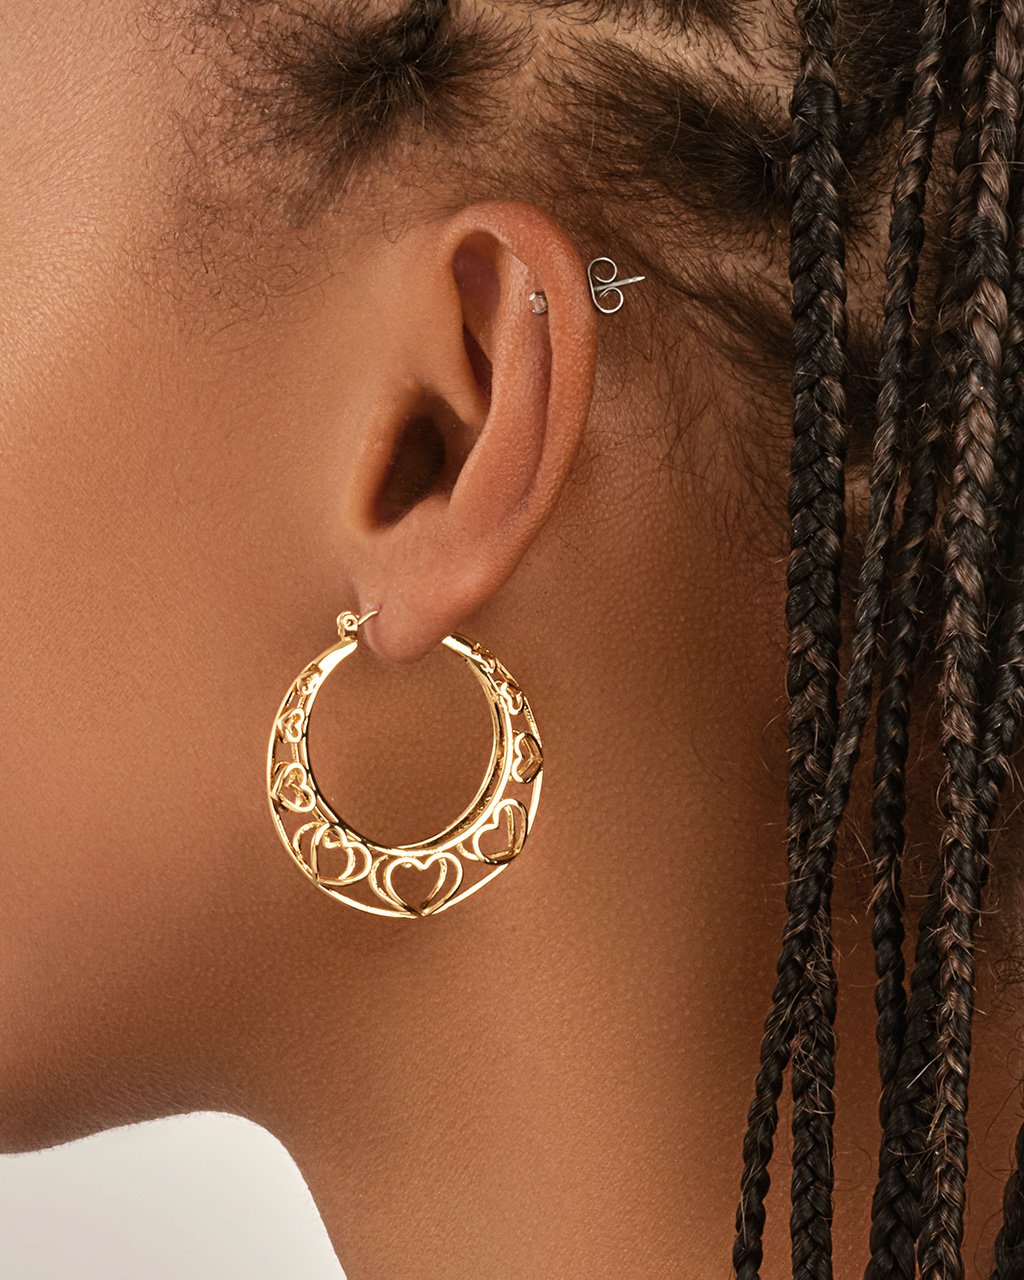 Cut Out Heart Hoops Earring Sterling Forever 